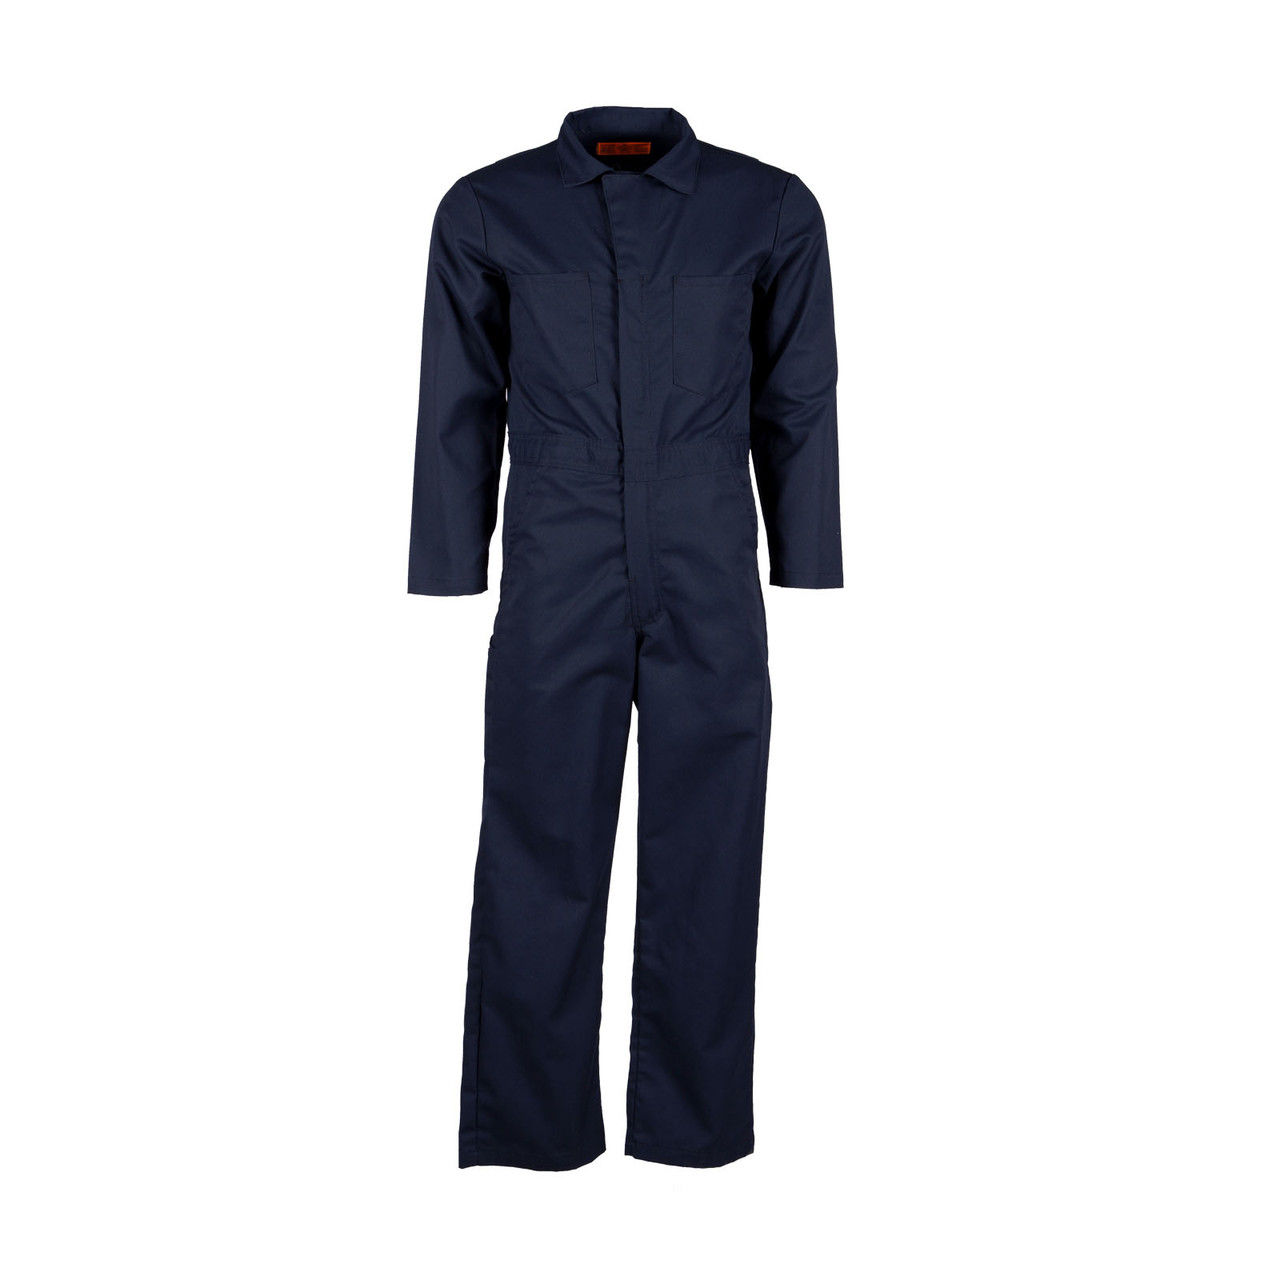 What key features do the CV10NV navy coveralls by Pinnacle Textile have?